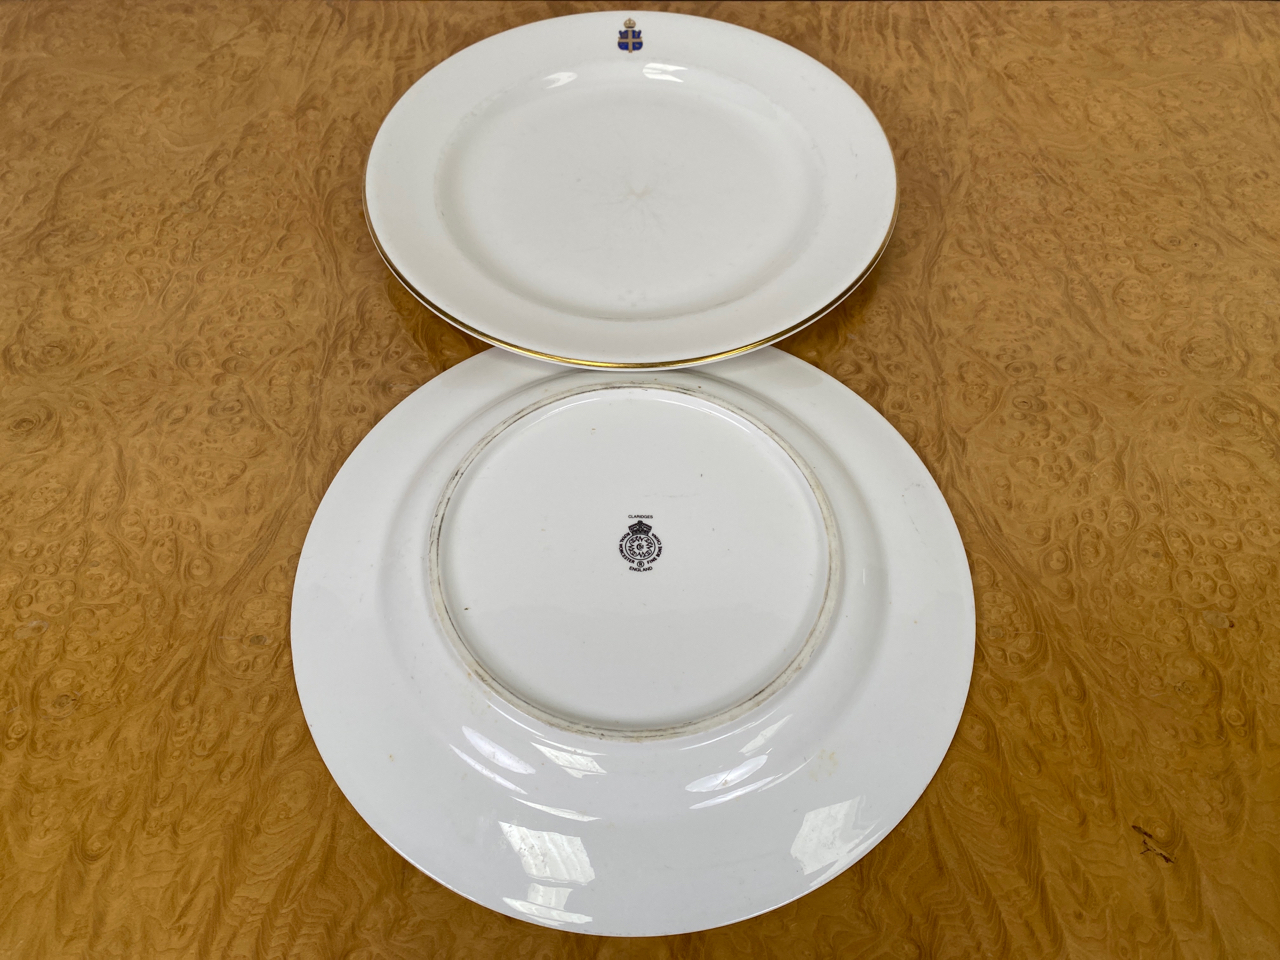 Set of Crested Crockery for Claridge's by Chommette 1884 - Image 26 of 36